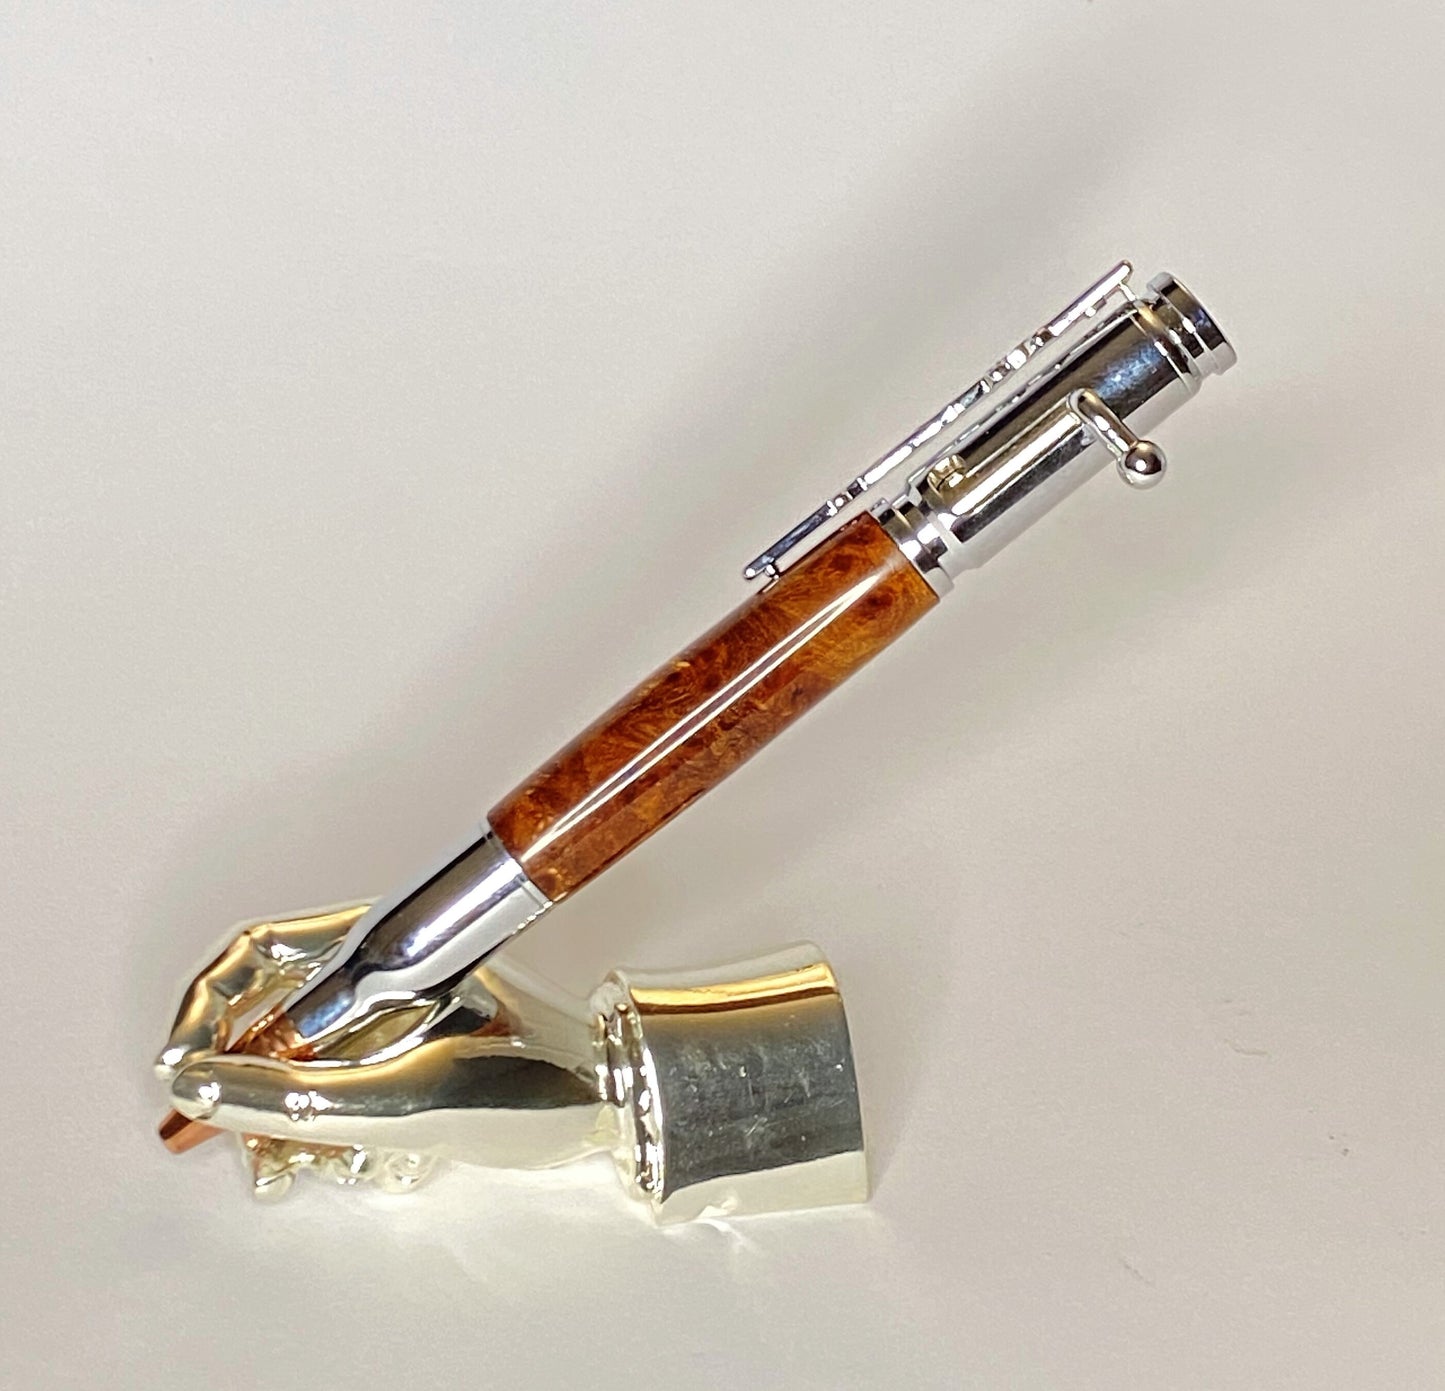 A right hand shaped metal base holding a handturned Popular Burr wood Bolt action pen as you would hold it to write with.